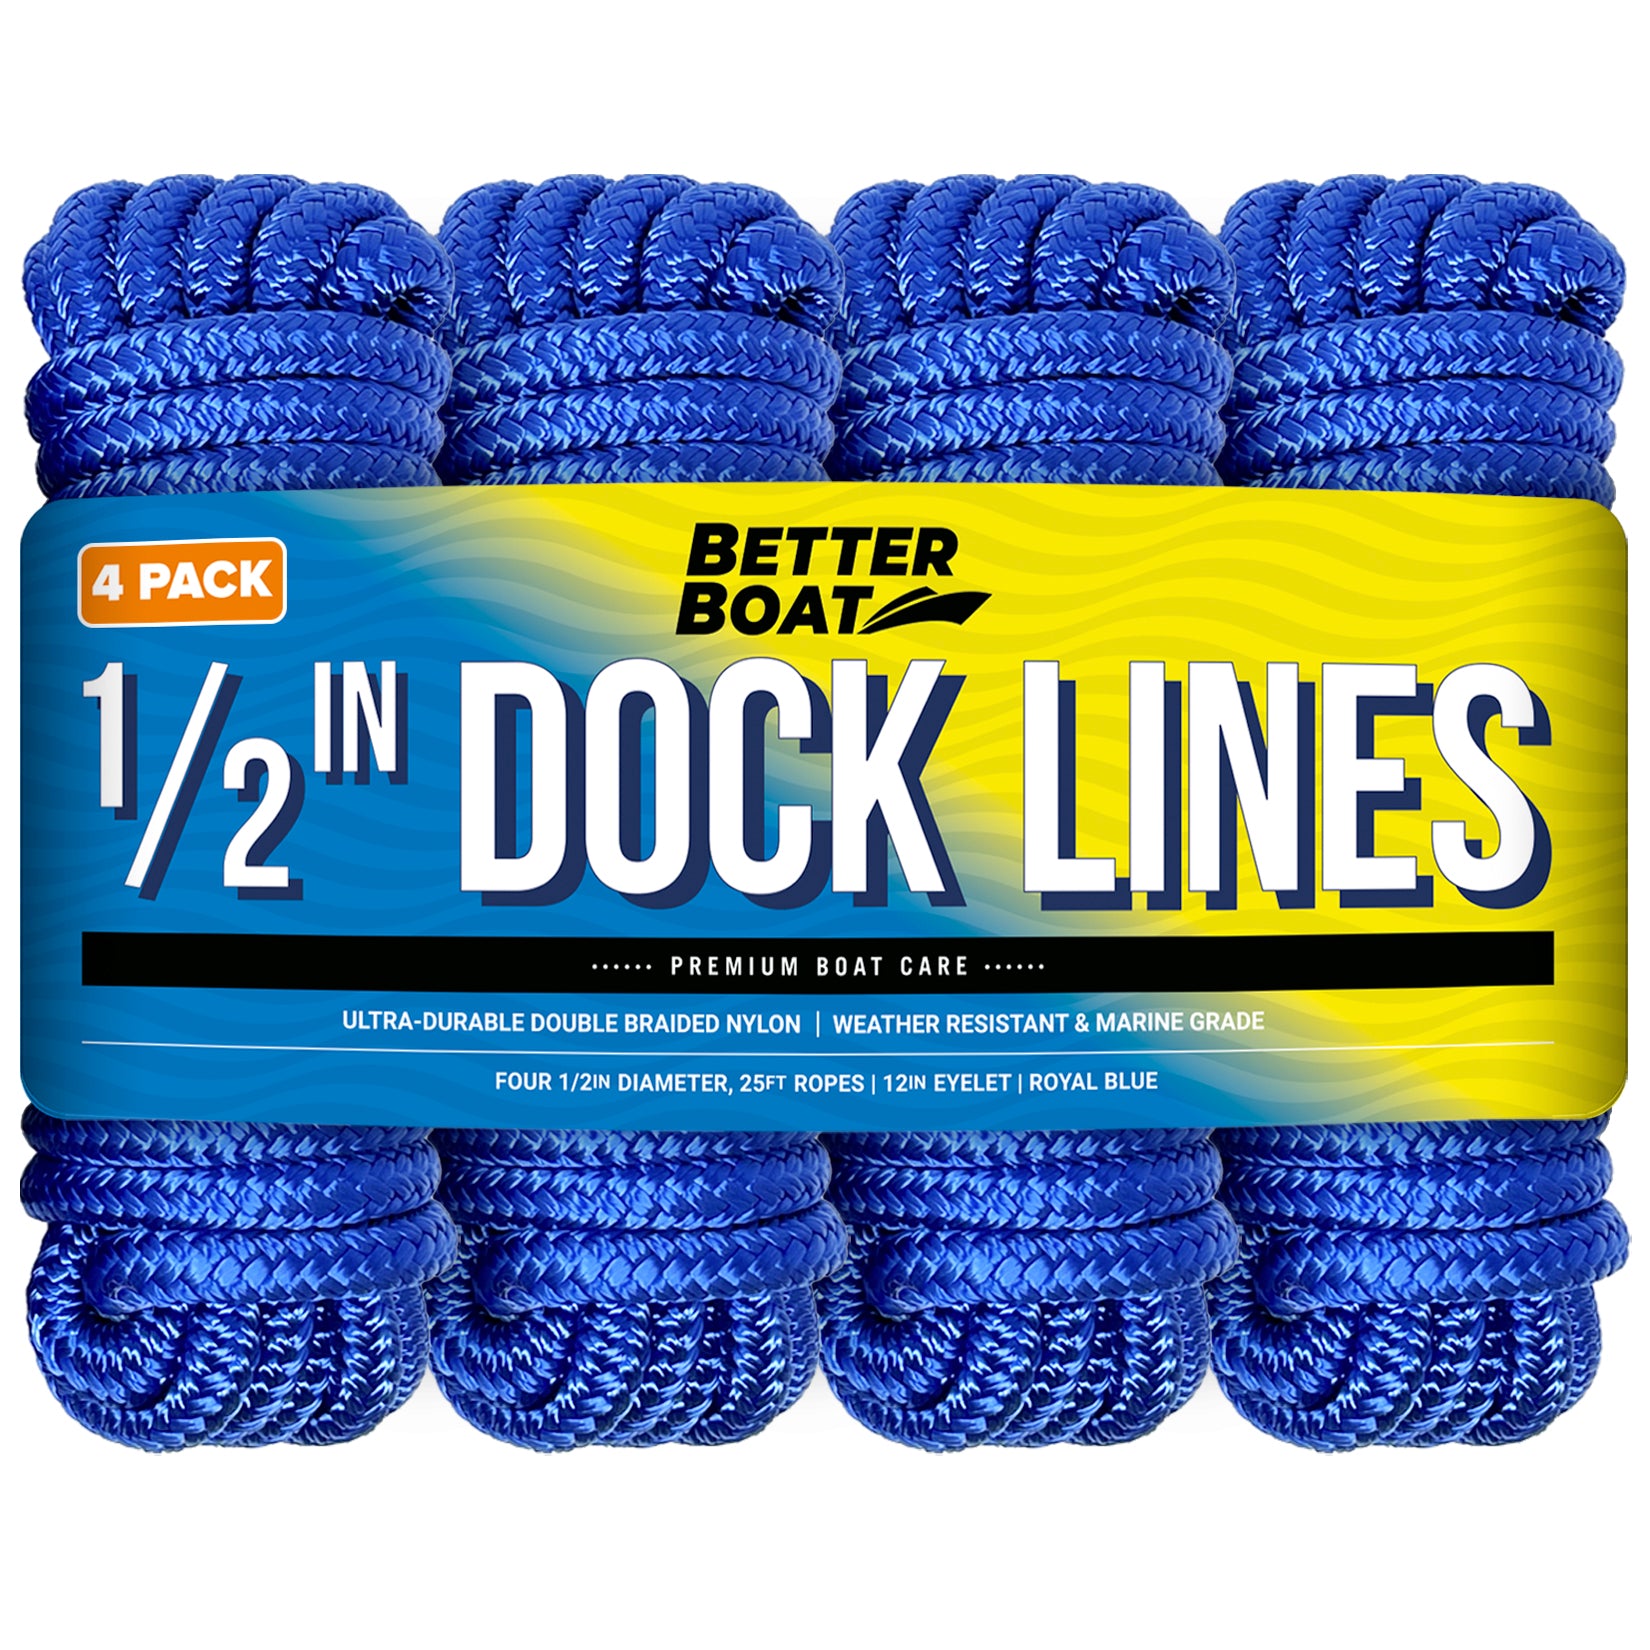 1/2 Inch Dock Lines  Double-Braided Nylon Dock Lines – Better Boat